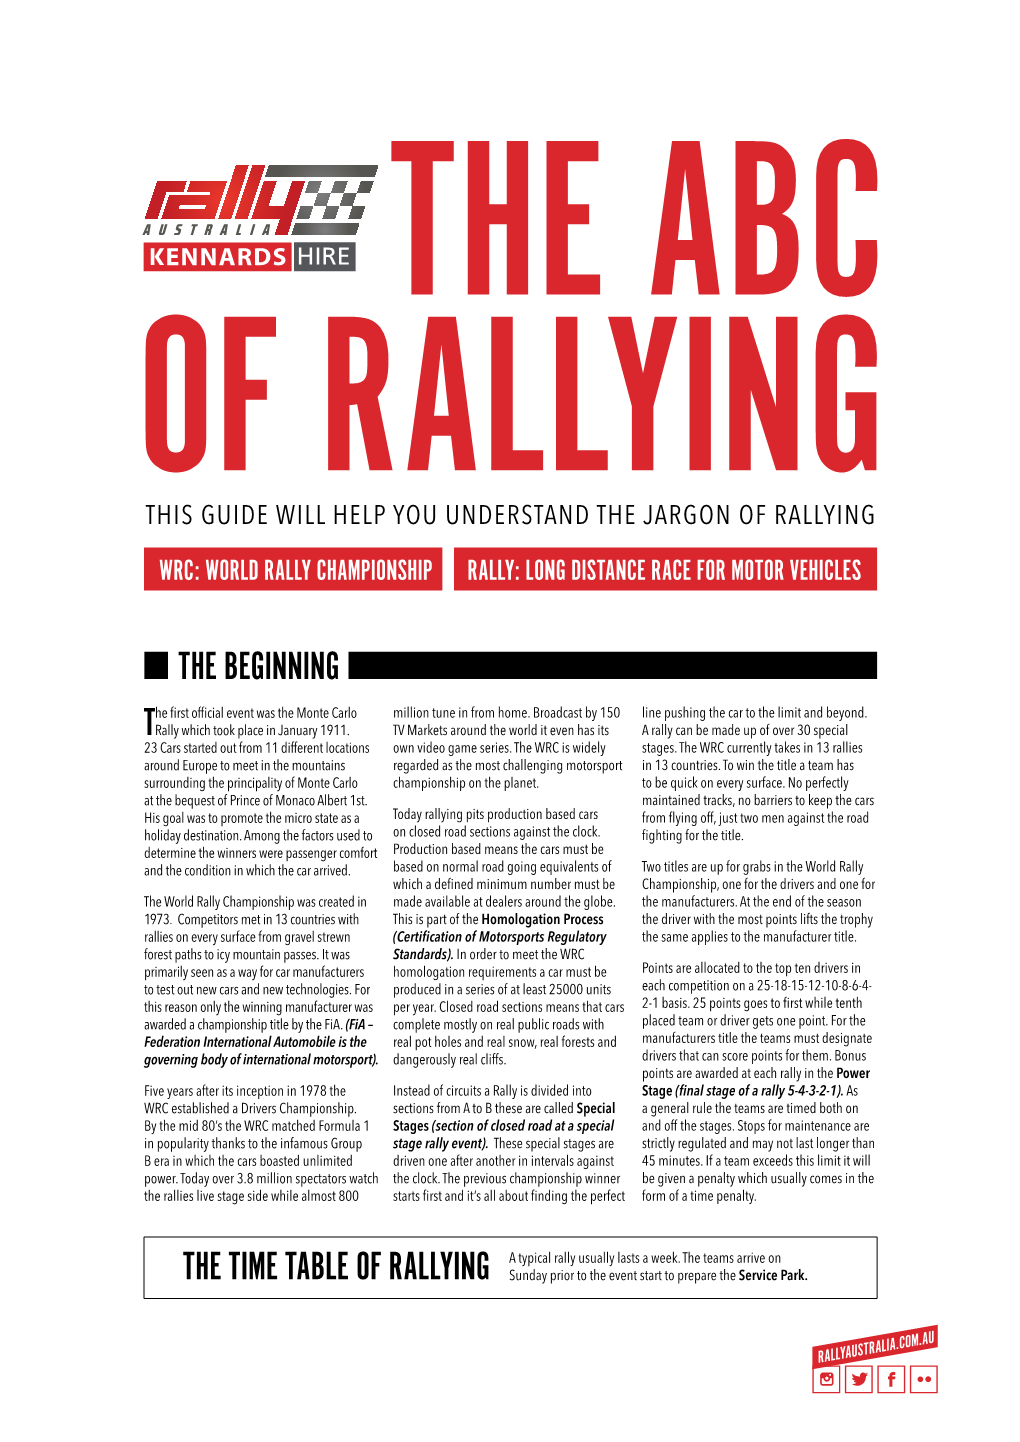 Abc of Rallying This Guide Will Help You Understand the Jargon of Rallying Wrc: World Rally Championship Rally: Long Distance Race for Motor Vehicles